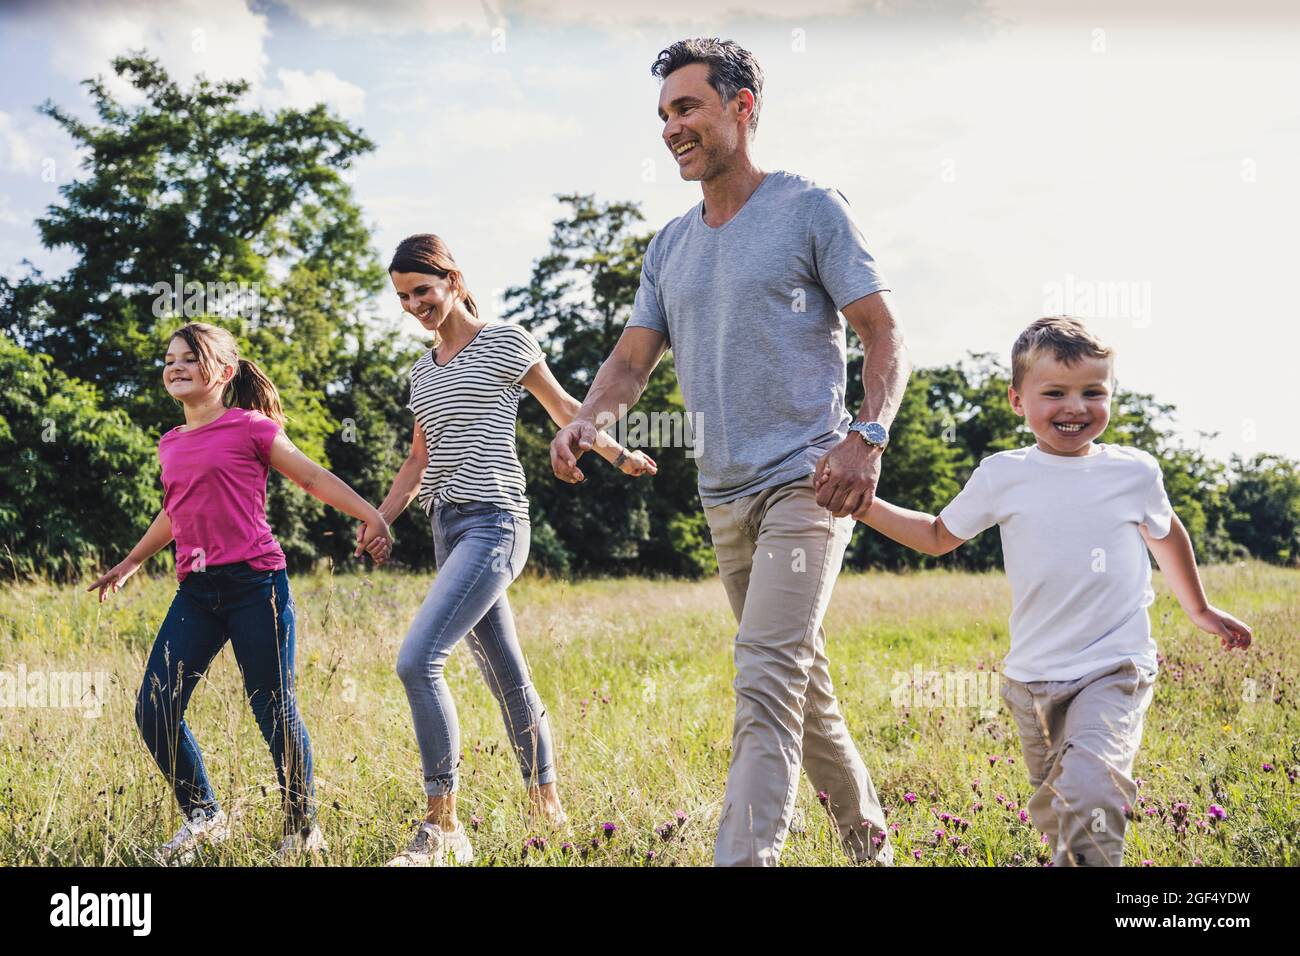 Smiling family holding hands while walking on grass Stock Photo